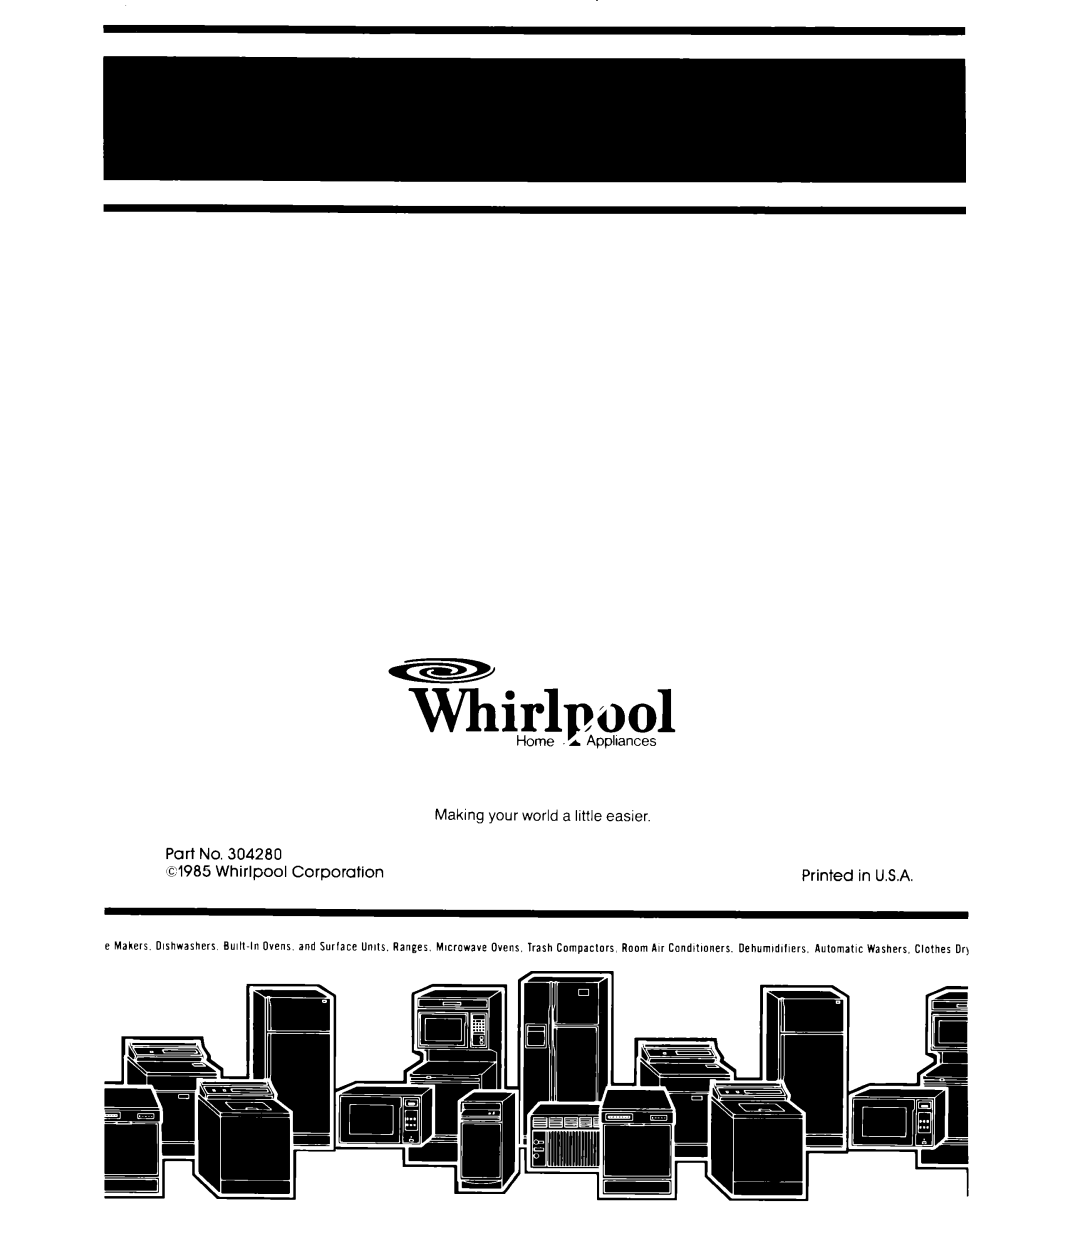 Whirlpool DU9900XR manual Whirlpool, A /Apphances, Making your world a little easier, Cl985, Corporation, Printed, in U.S.A 